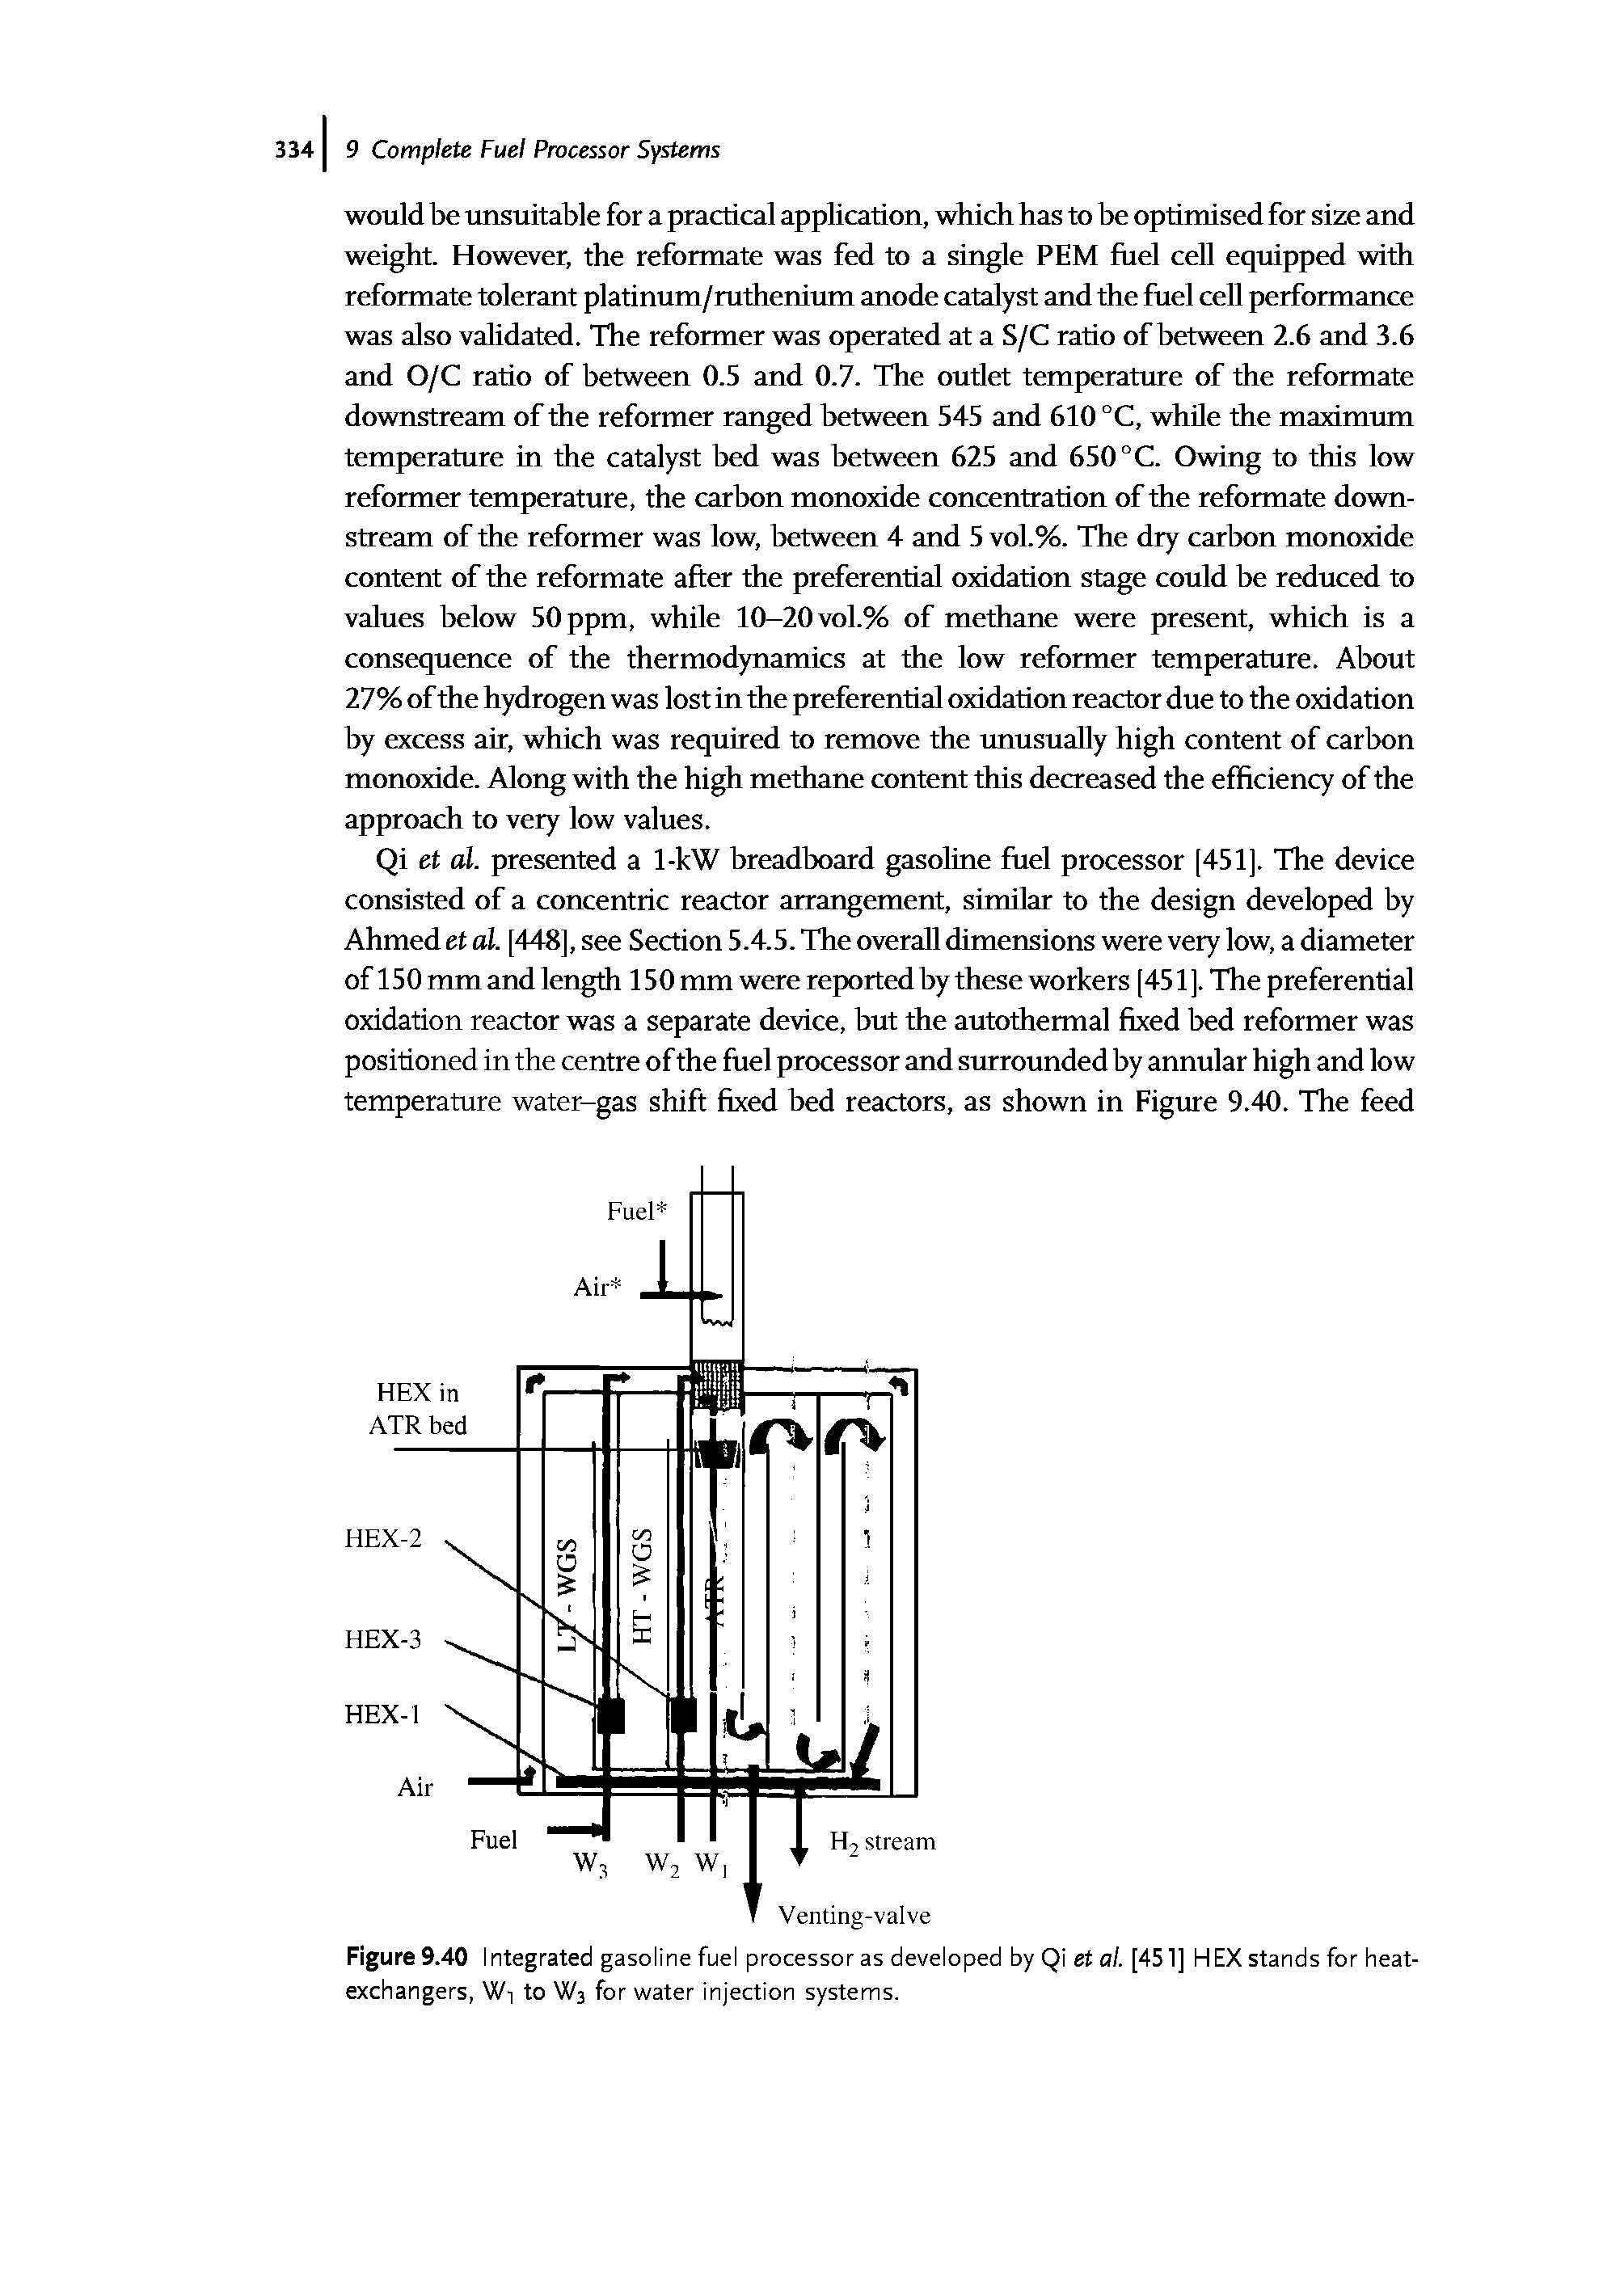 Figure 9.40 Integrated gasoline fuel processor as developed by Qi et al. [451] HEX stands for heat-exchangers, Wi to W3 for water injection systems.